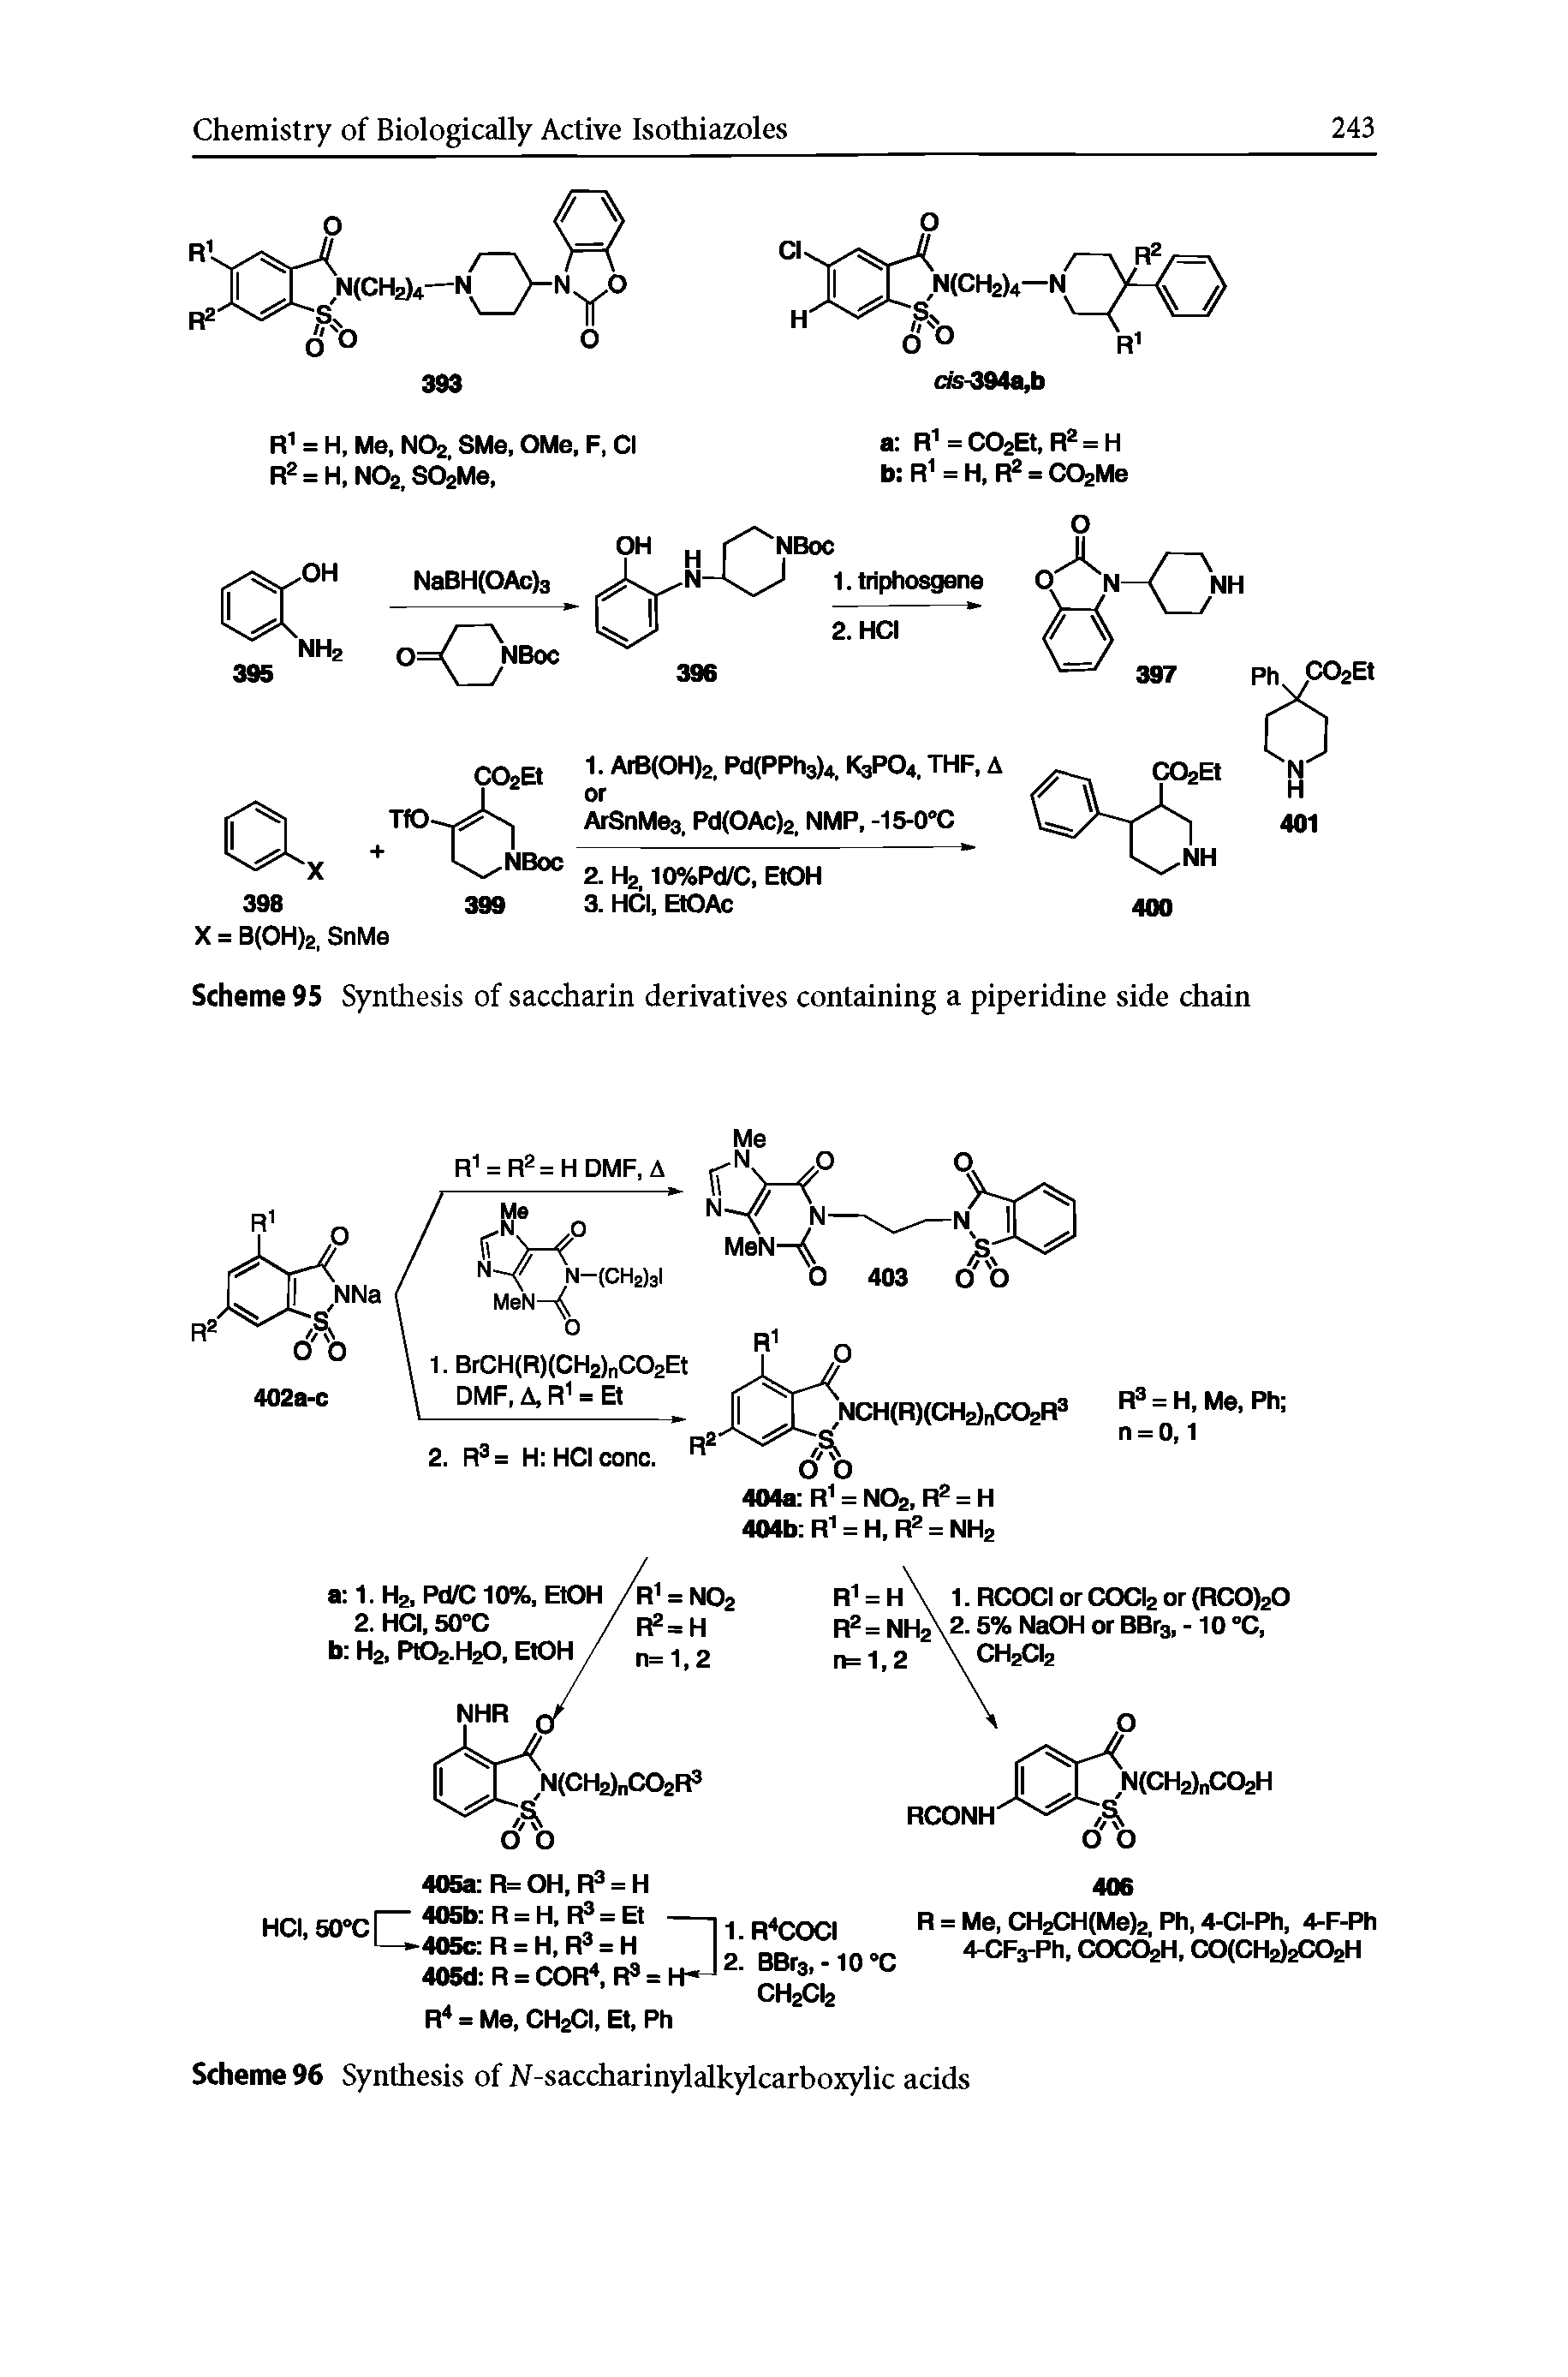 Scheme 95 Synthesis of saccharin derivatives containing a piperidine side chain...